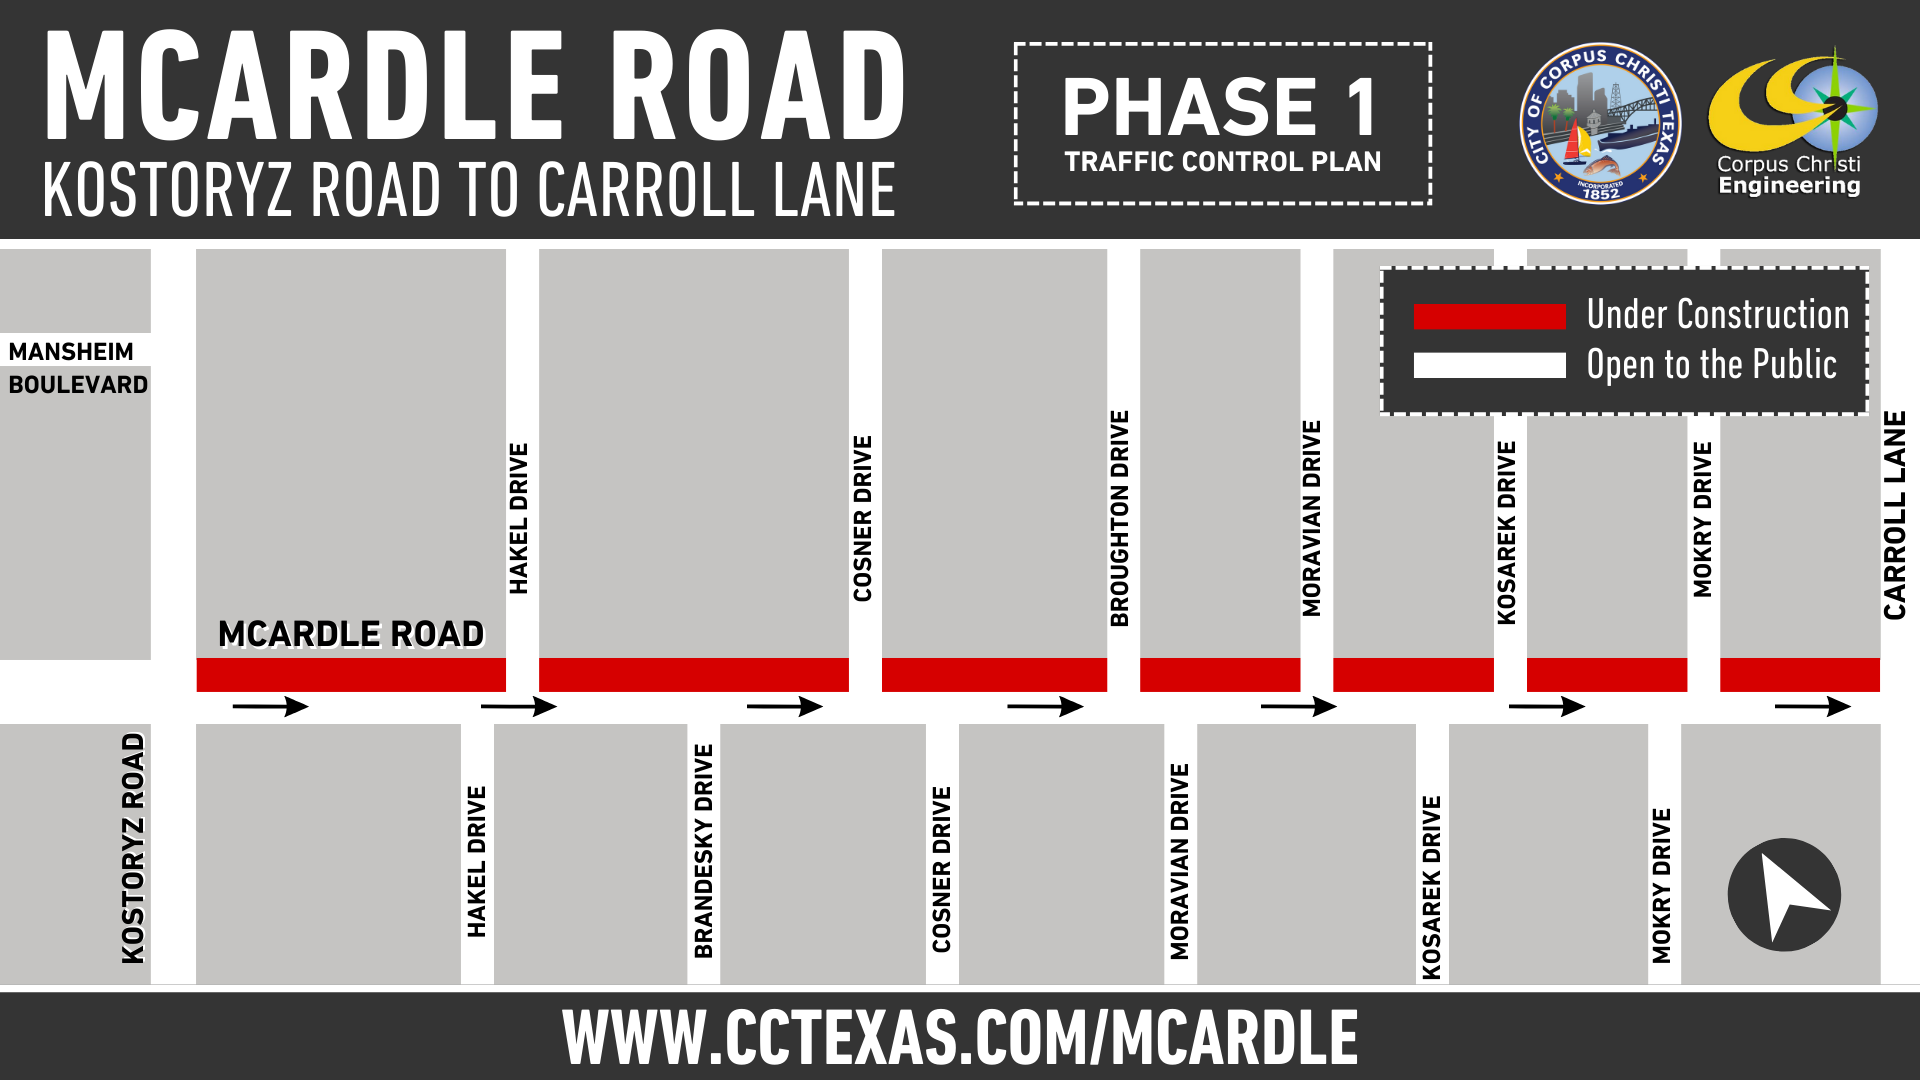 Mcardle Road: Phase 1 Traffic Control Plan